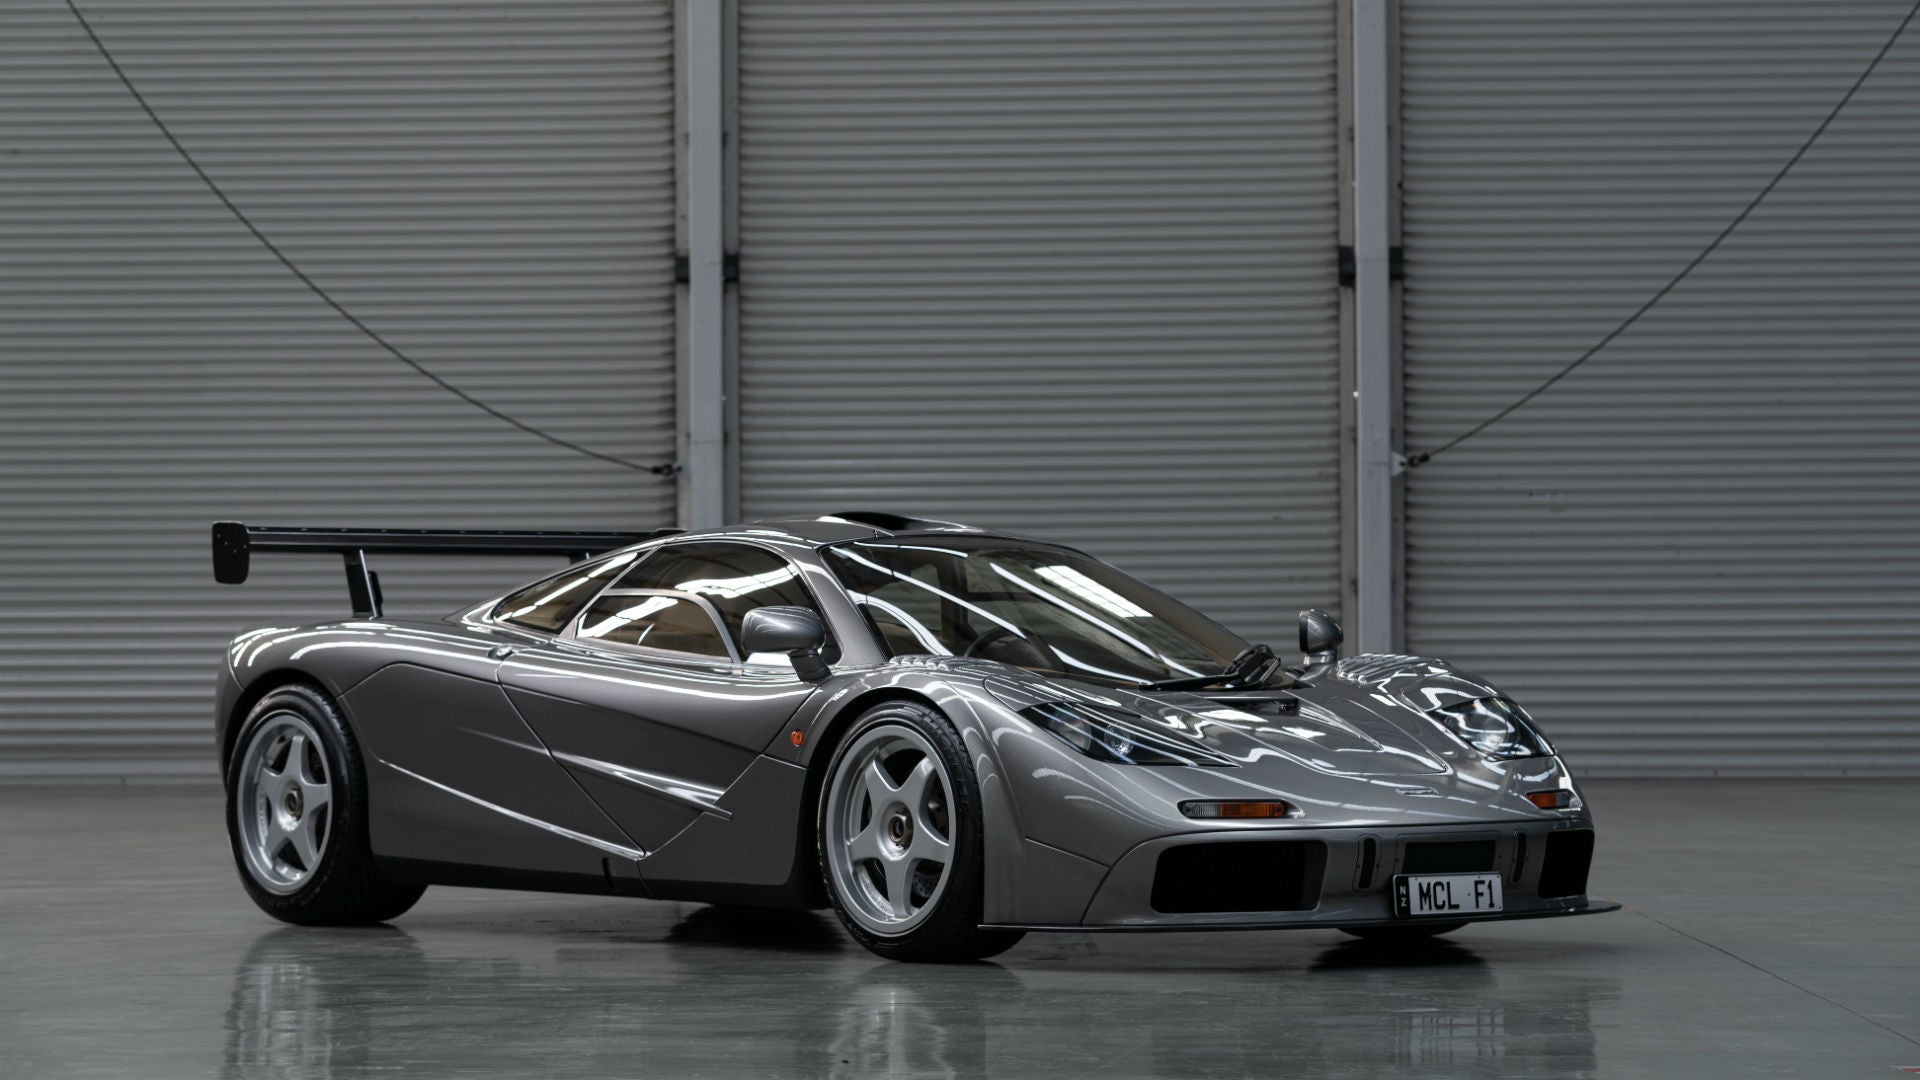 McLaren F1 LM-Specification Sells for Record-Breaking $19,800,000 at Monterey Car Week Auction